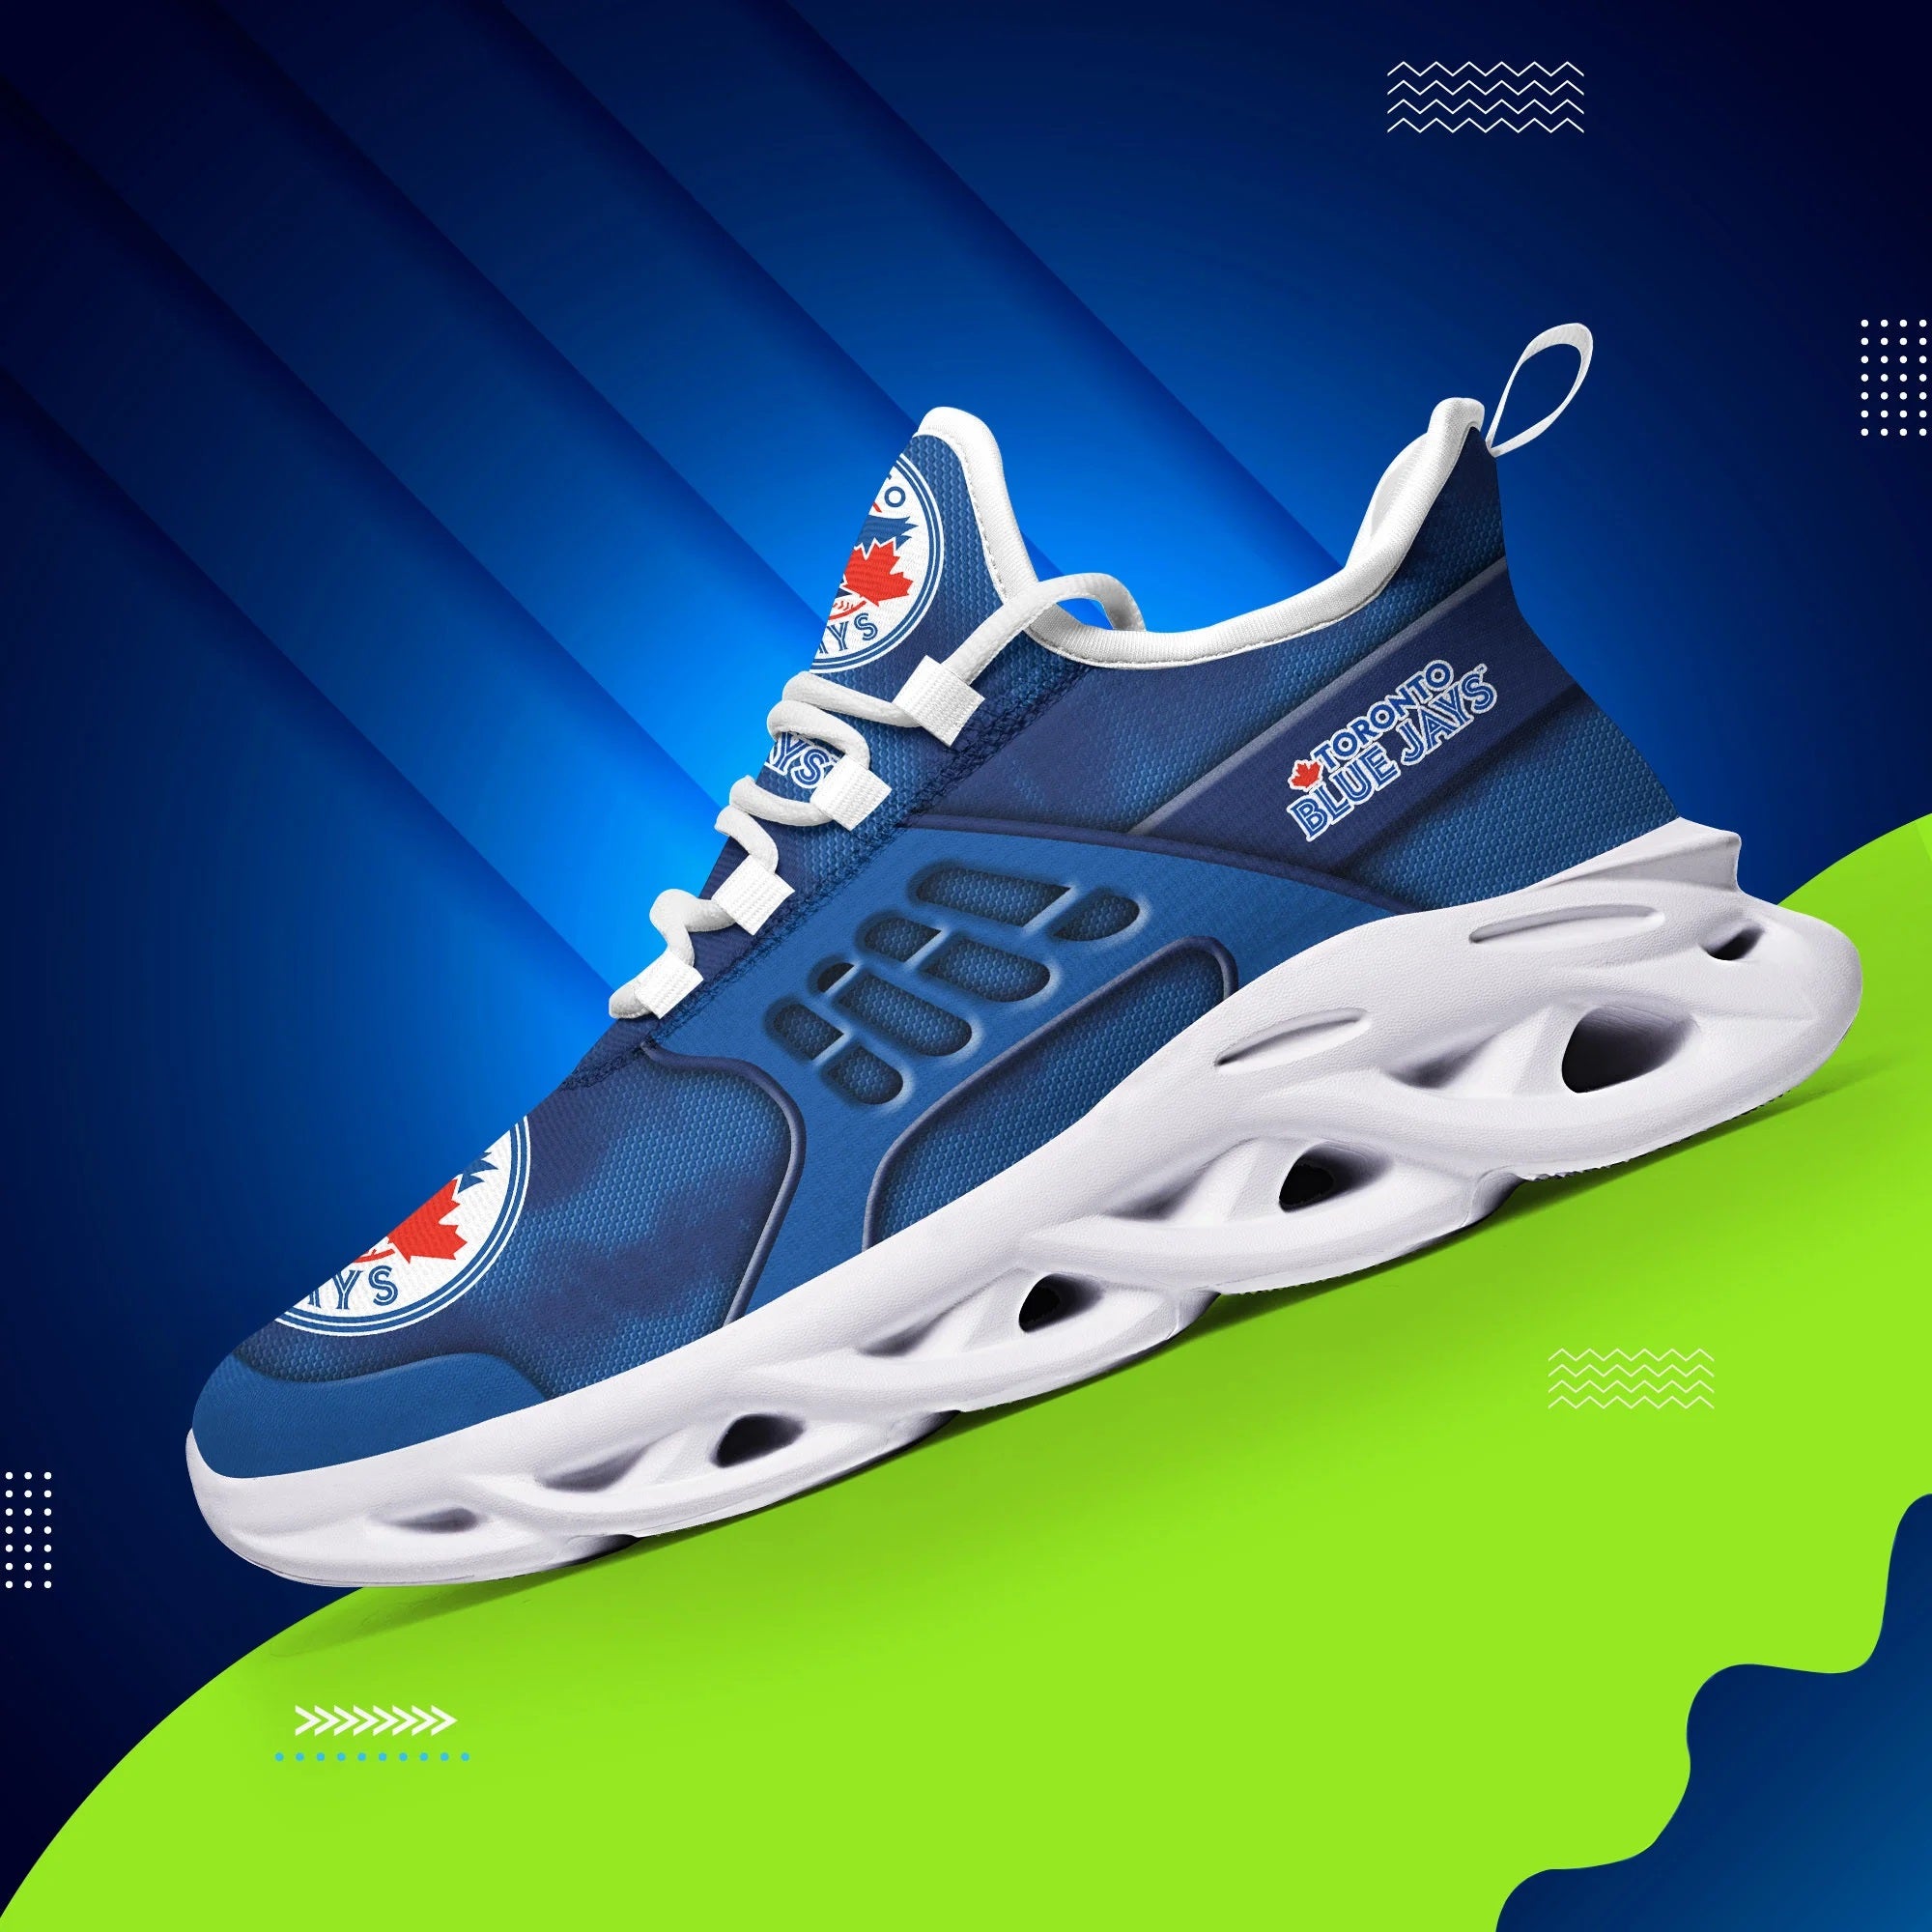 Toronto Blue Jays Casual Air Max Running Shoes